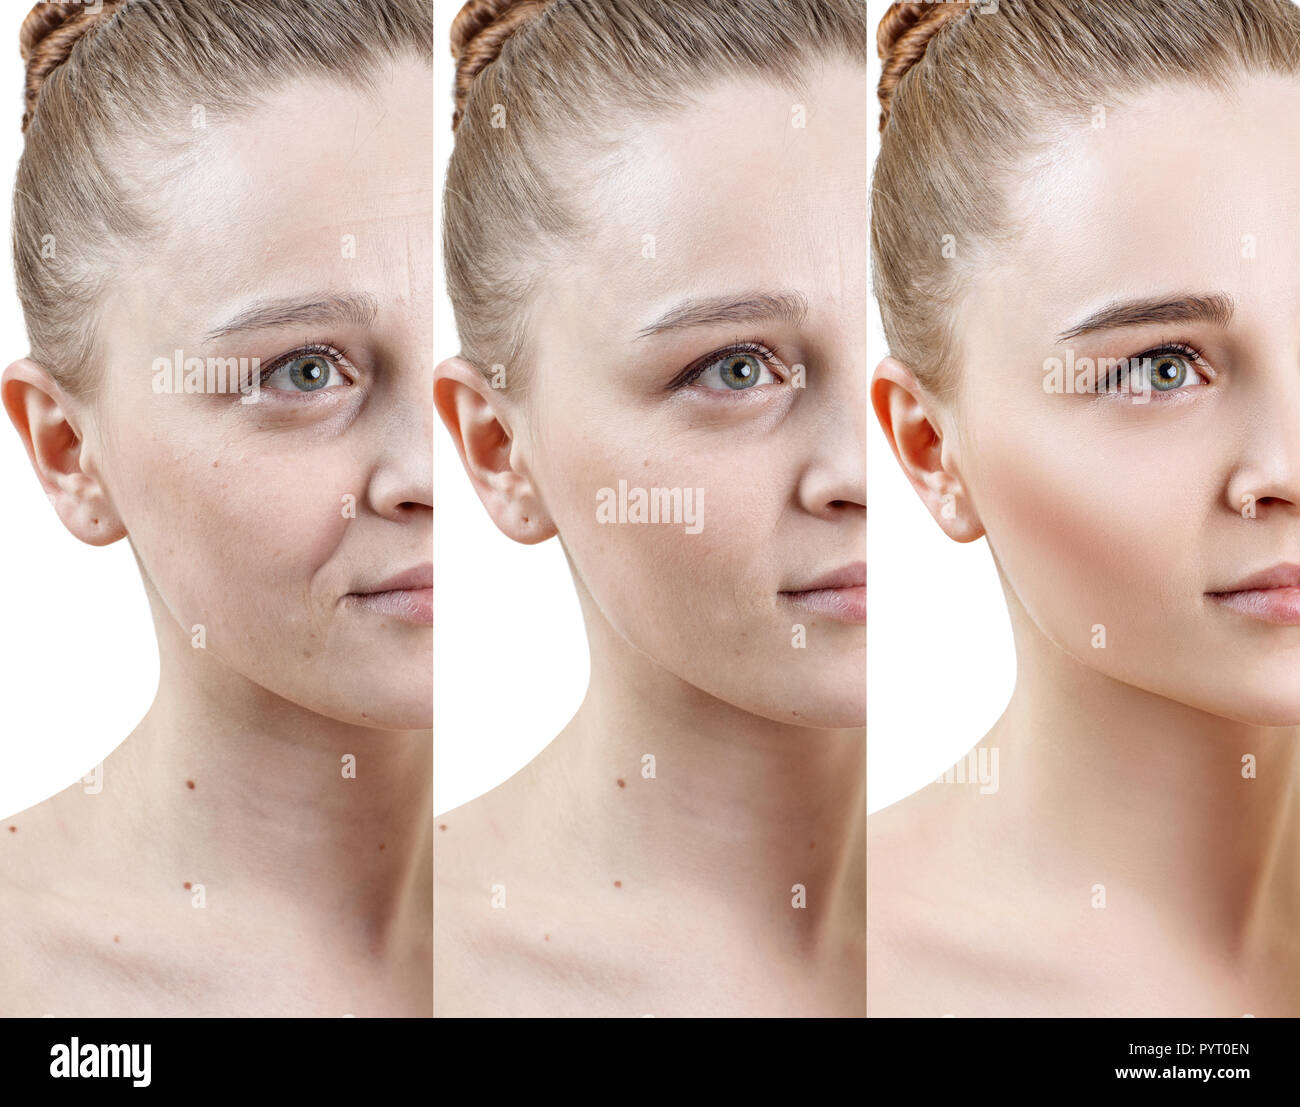 Woman with phase of skin rejuvenation before and after treatment. Stock Photo